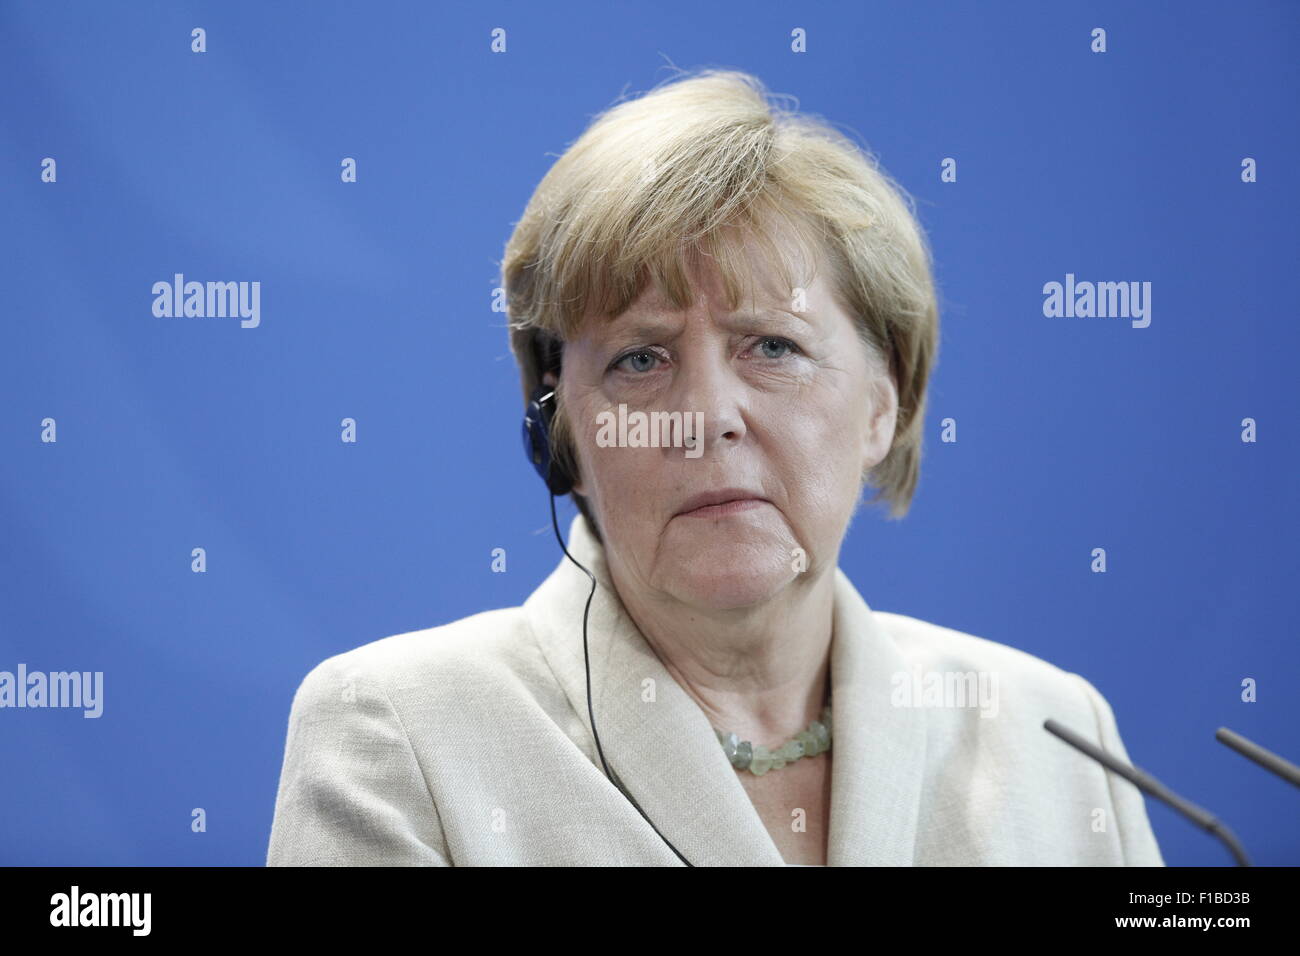 Berlin, Germany. 01st Sep, 2015. German Chancellor Angela Merkel together with Spanish Prime Minster Mariano Rajoy give a joint press conference at the German Chancellery in Berlin, German on september 01, 2015. / Picture:  Mariano Rajoy, Prime Minister of Spain,Angela Merkel, German Chancellor. Credit:  Reynaldo Chaib Paganelli/Alamy Live News Stock Photo